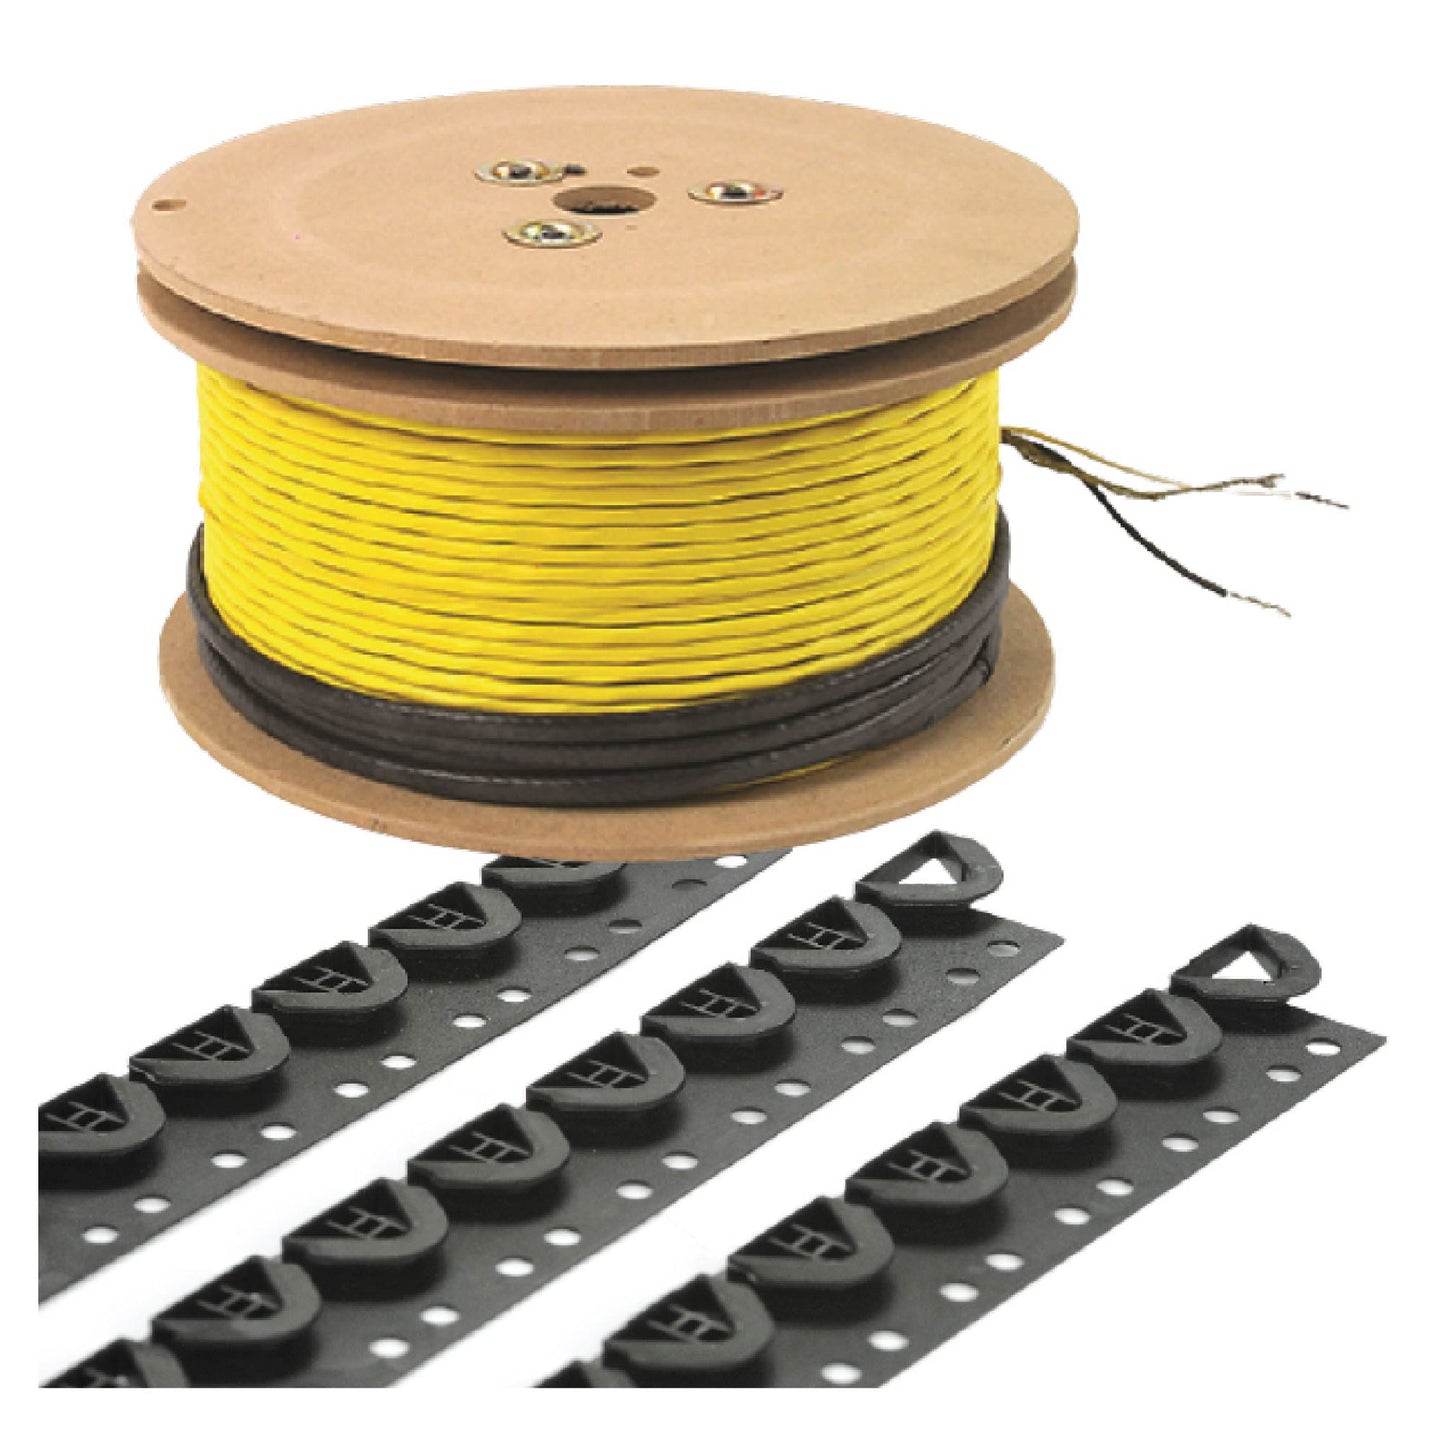 120V Floor Heating Cable With Floor Guides